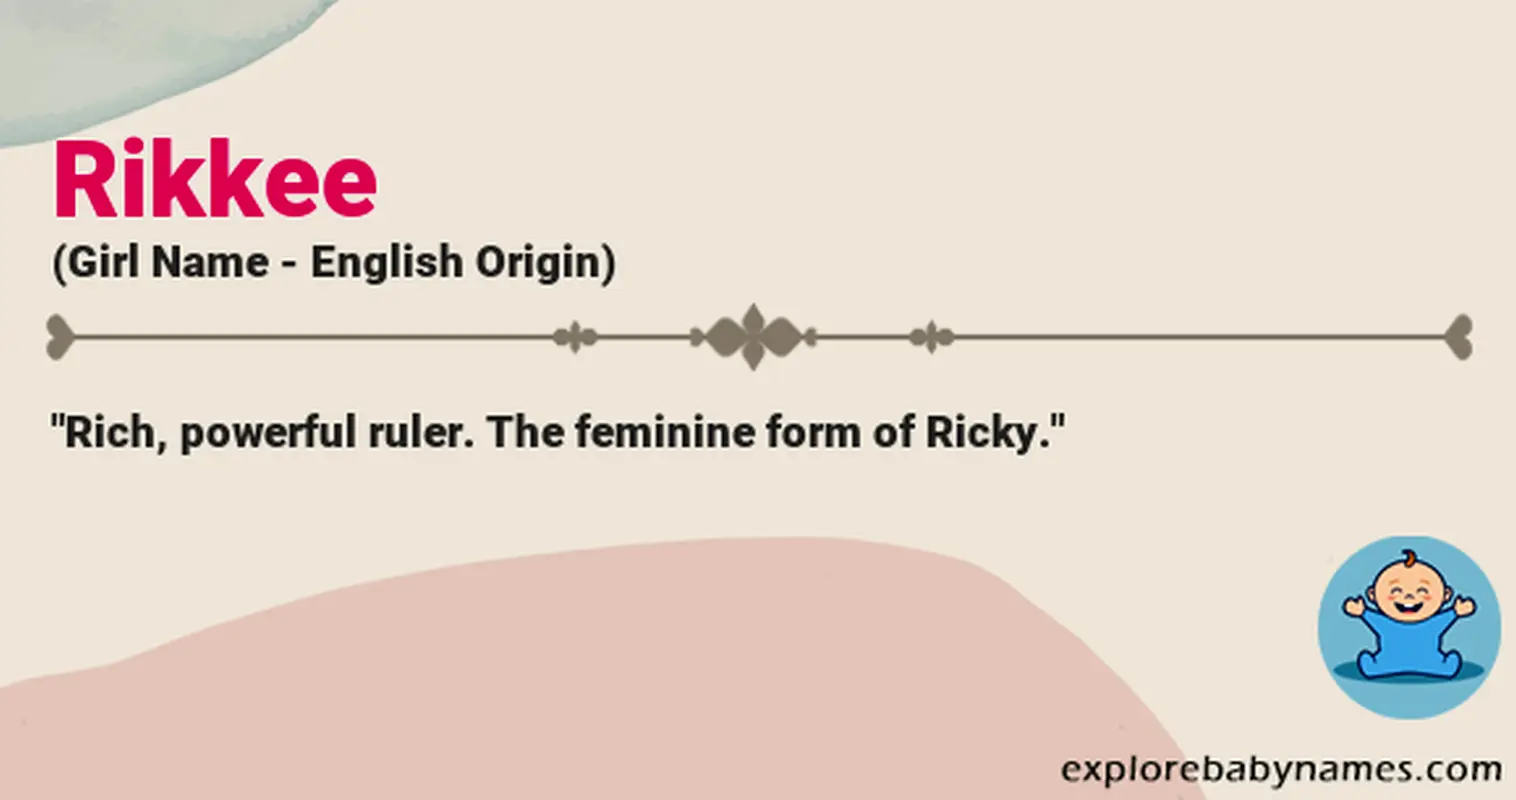 Meaning of Rikkee